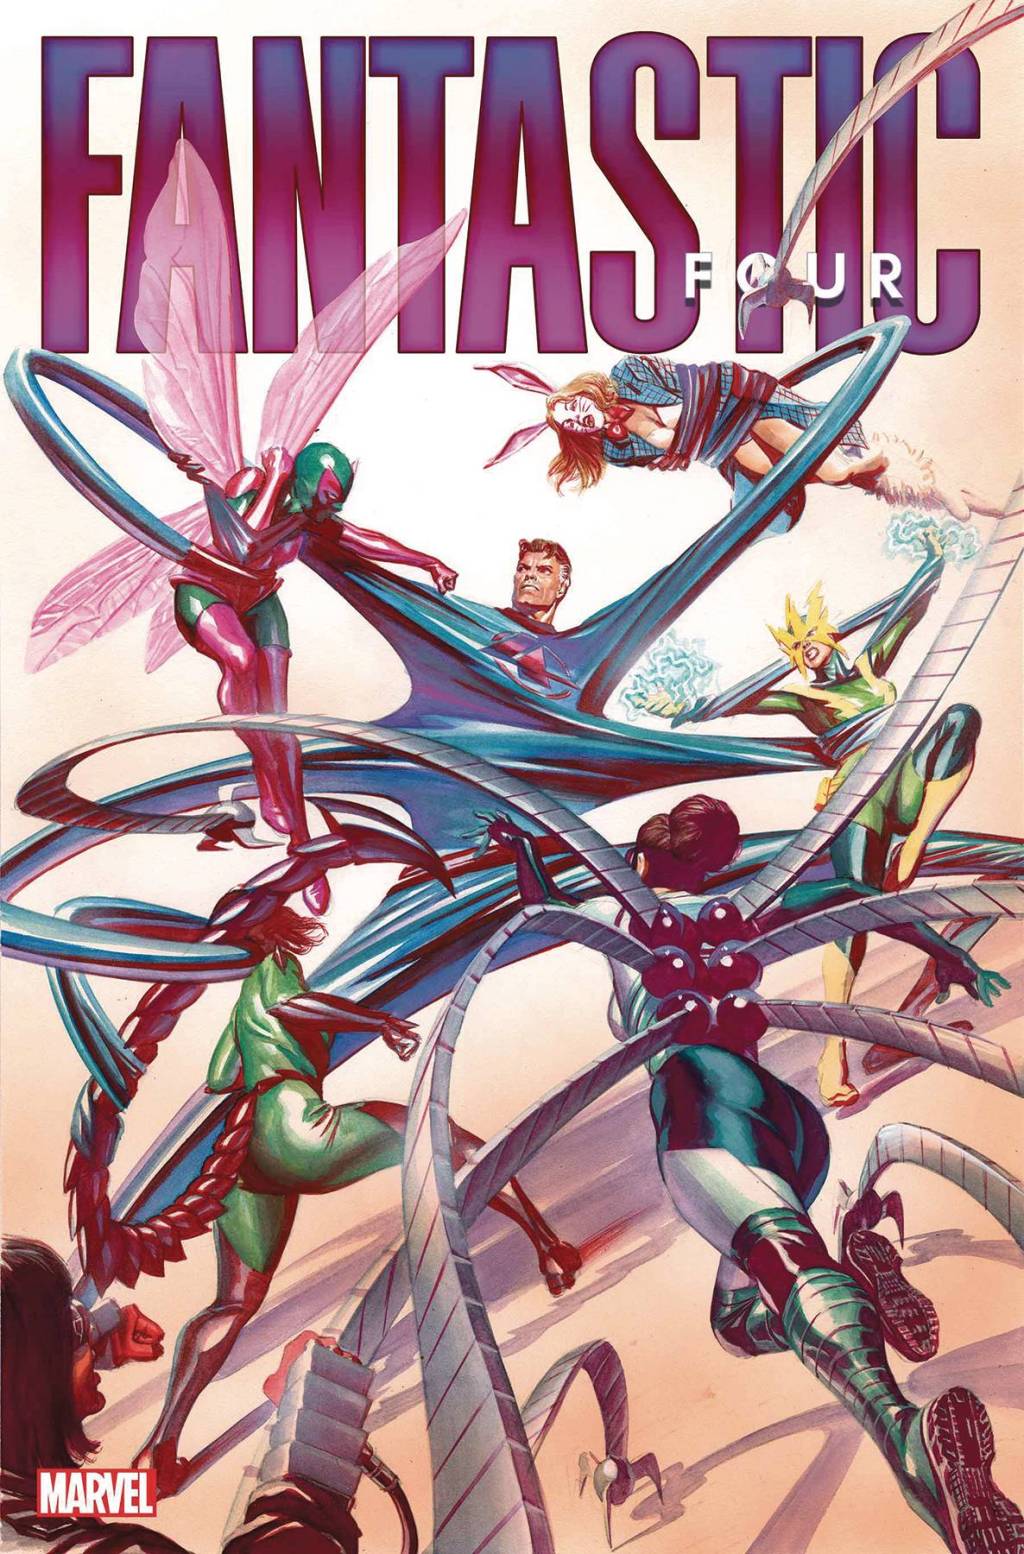 Reed Richards single-handedly takes on the Syndicate on Ale Ross' cover to Fantastic Four Vol. 7 #14 "The Unforeseeable Future" (2023), Marvel Comics